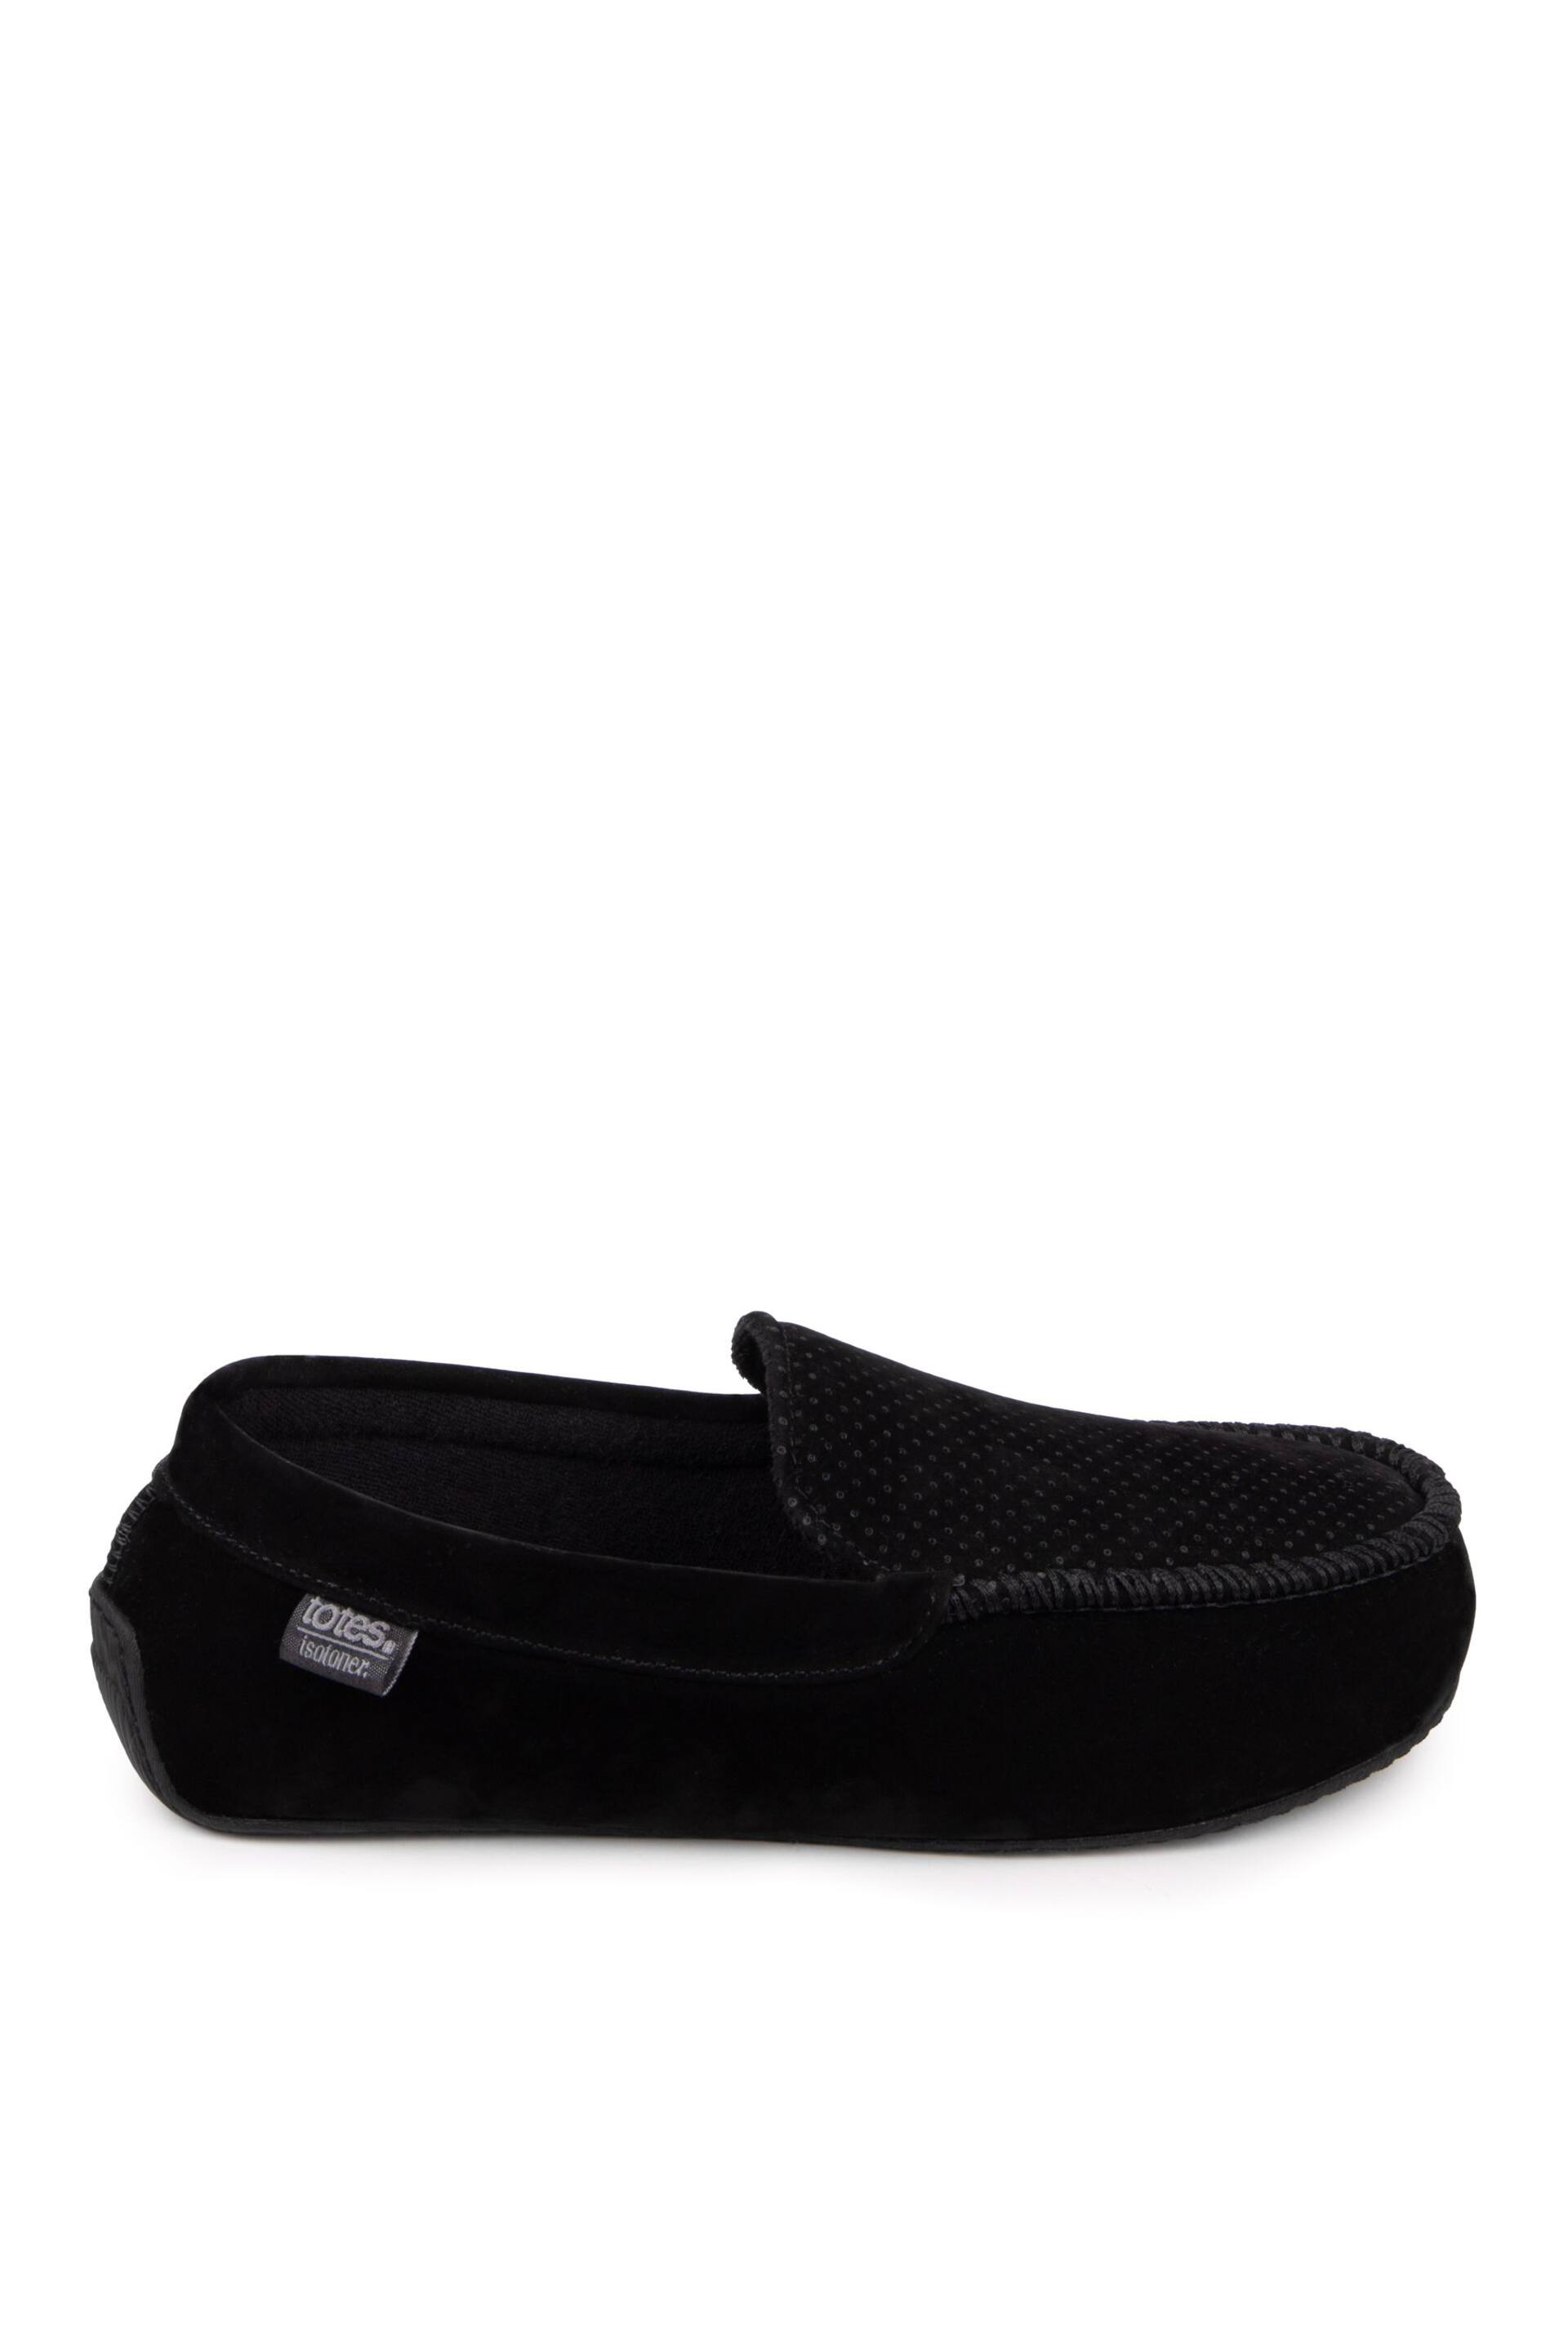 Totes Black Isotoner Airtex Suedette Mules Slippers - Image 2 of 5